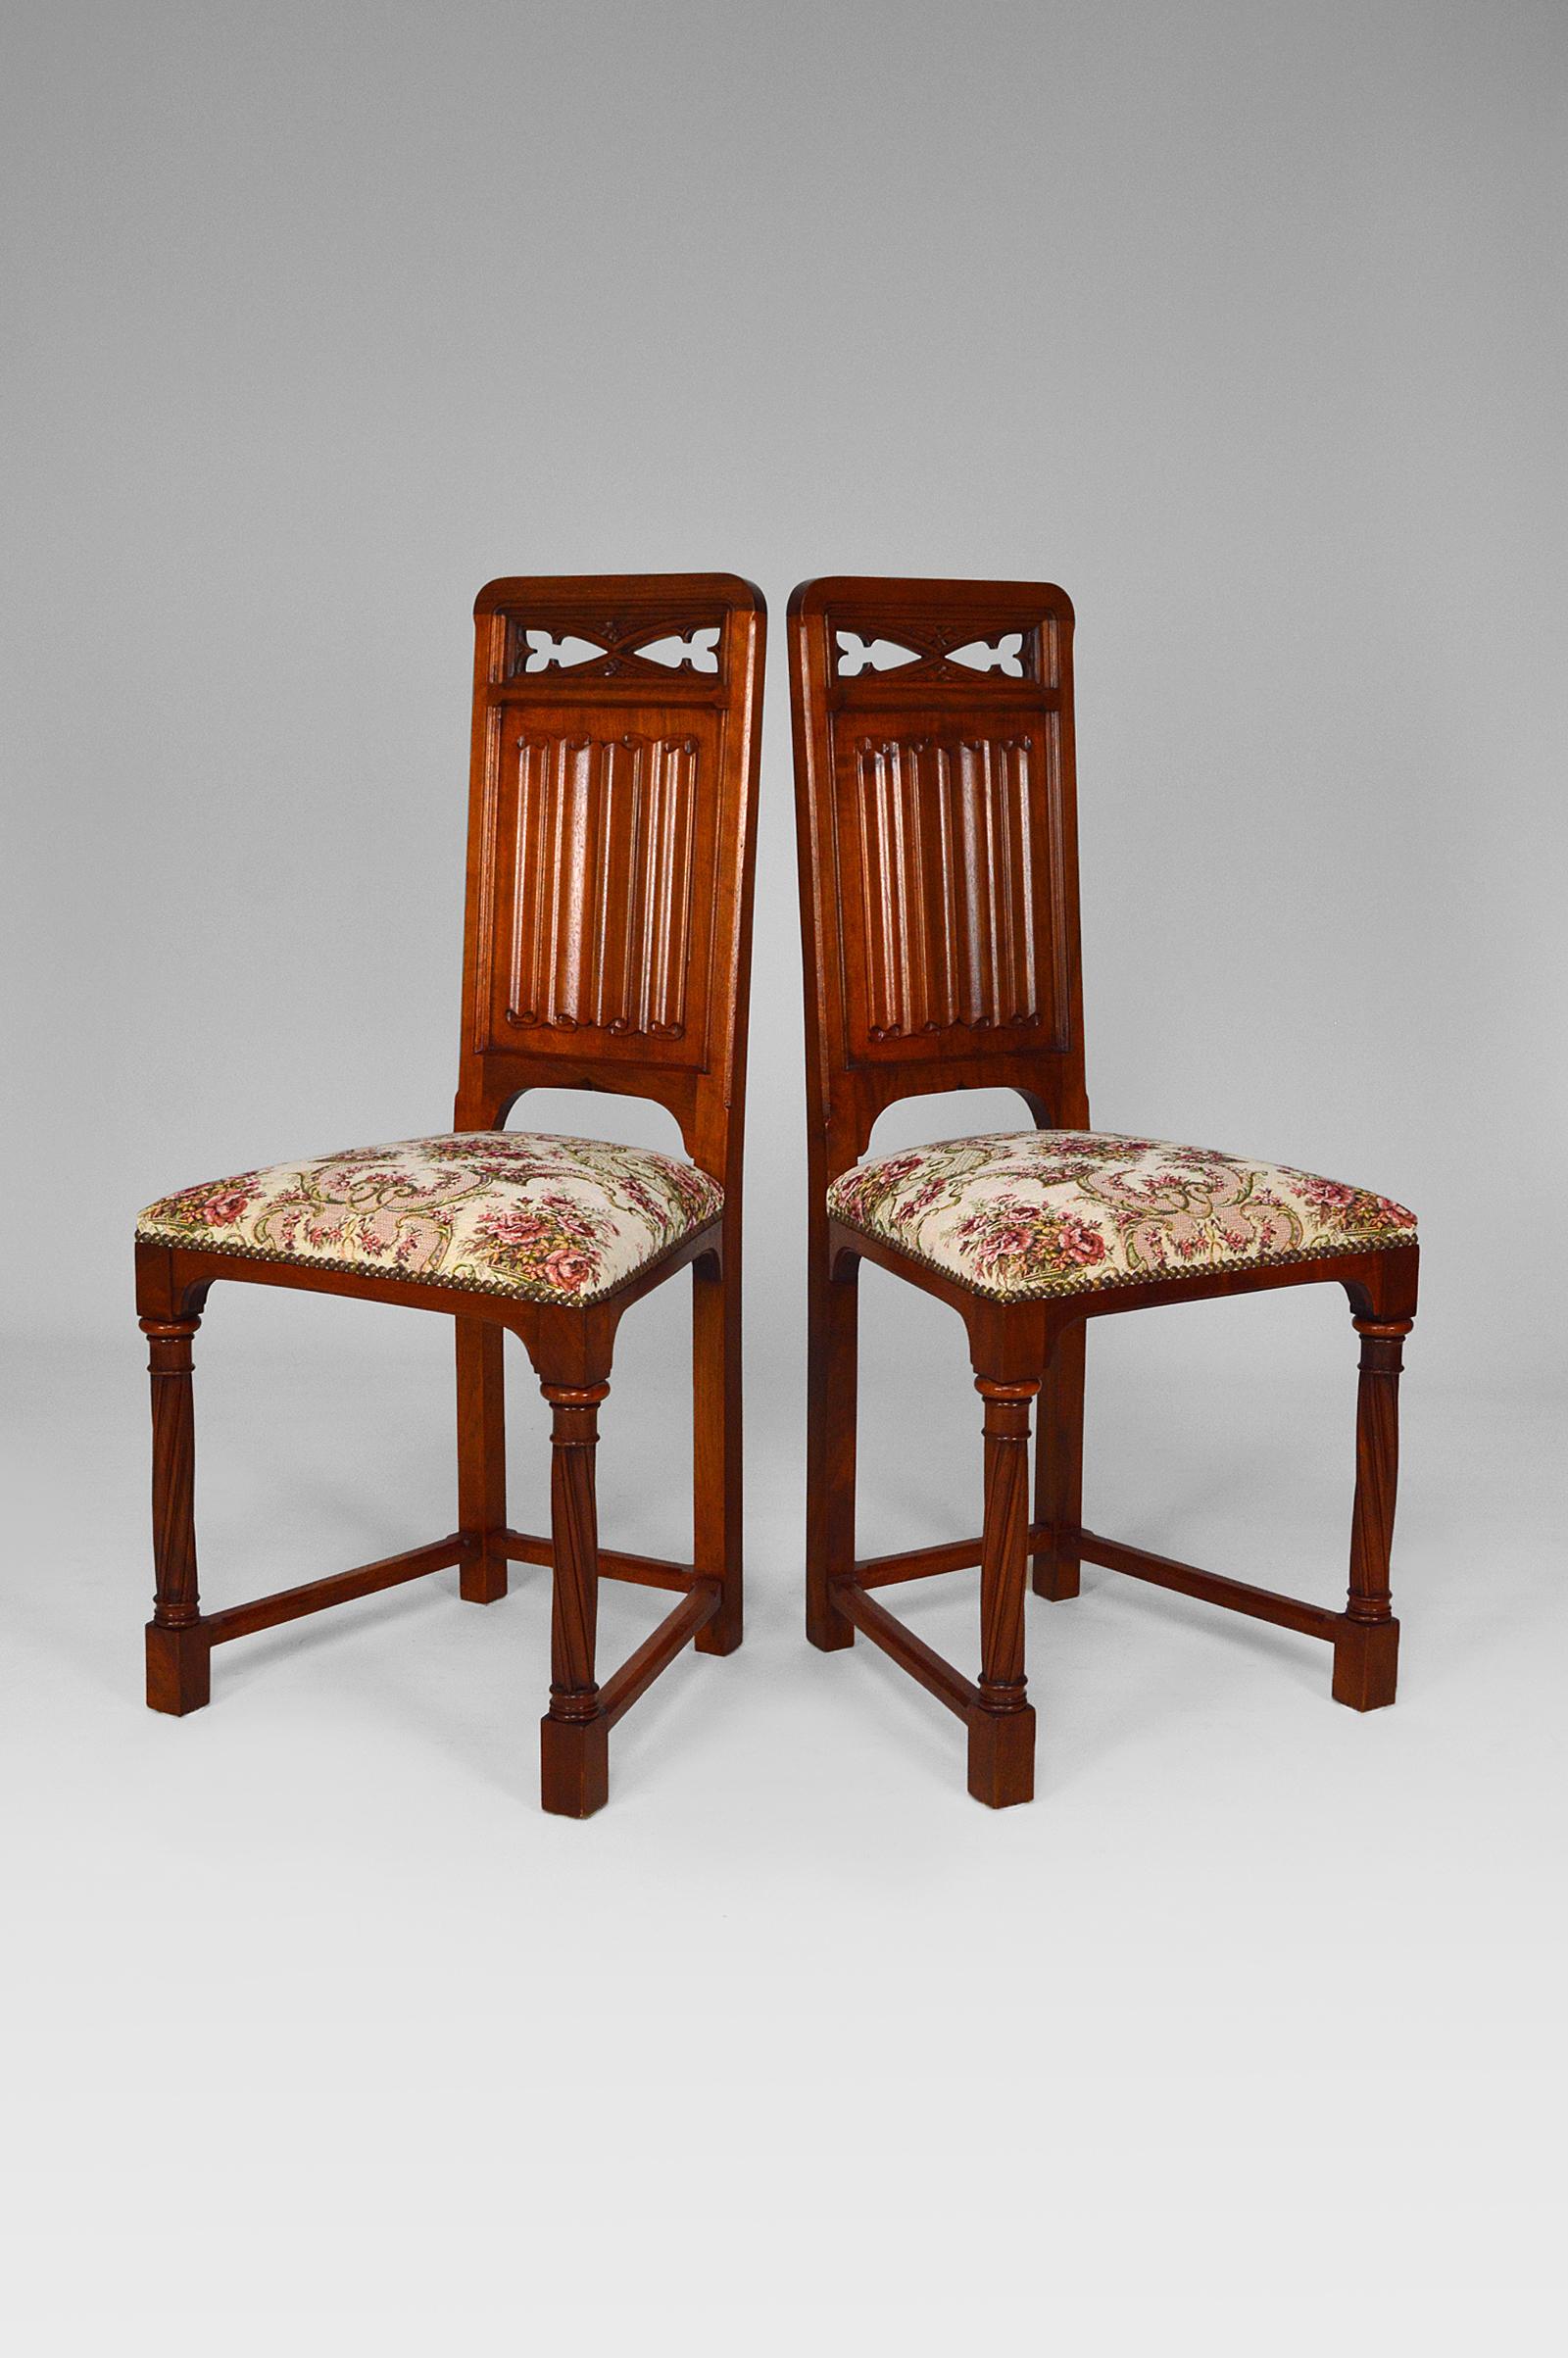 Pair of Antique Victorian Gothic Revival Chairs in Carved Walnut, 19th Century In Good Condition For Sale In L'Etang, FR